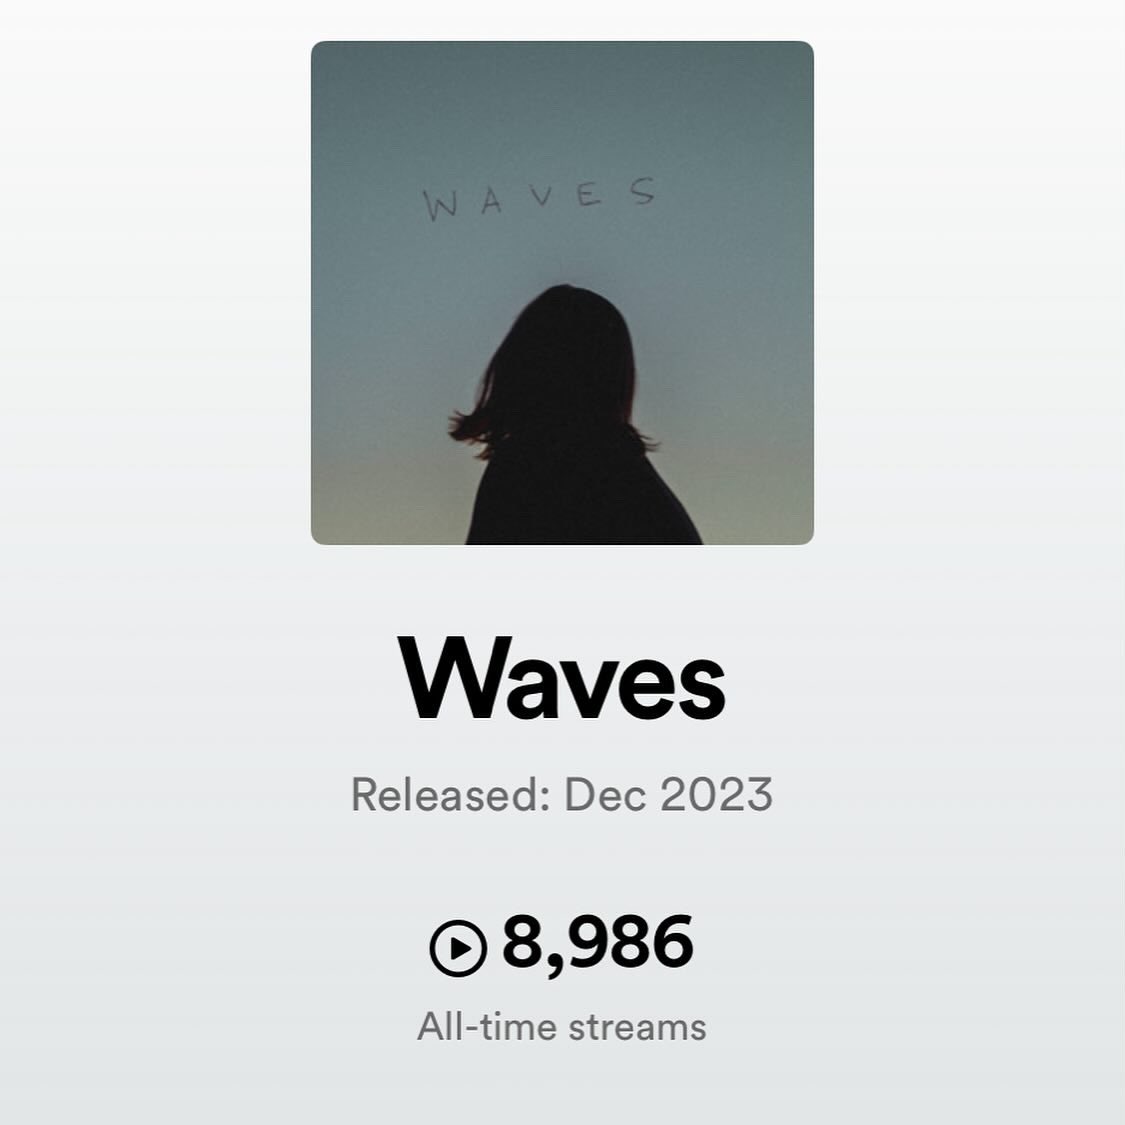 Nearly 9k streams on Waves EP thank you so much 🫶 Stream here: open.spotify.com/album/6xA893Bx…